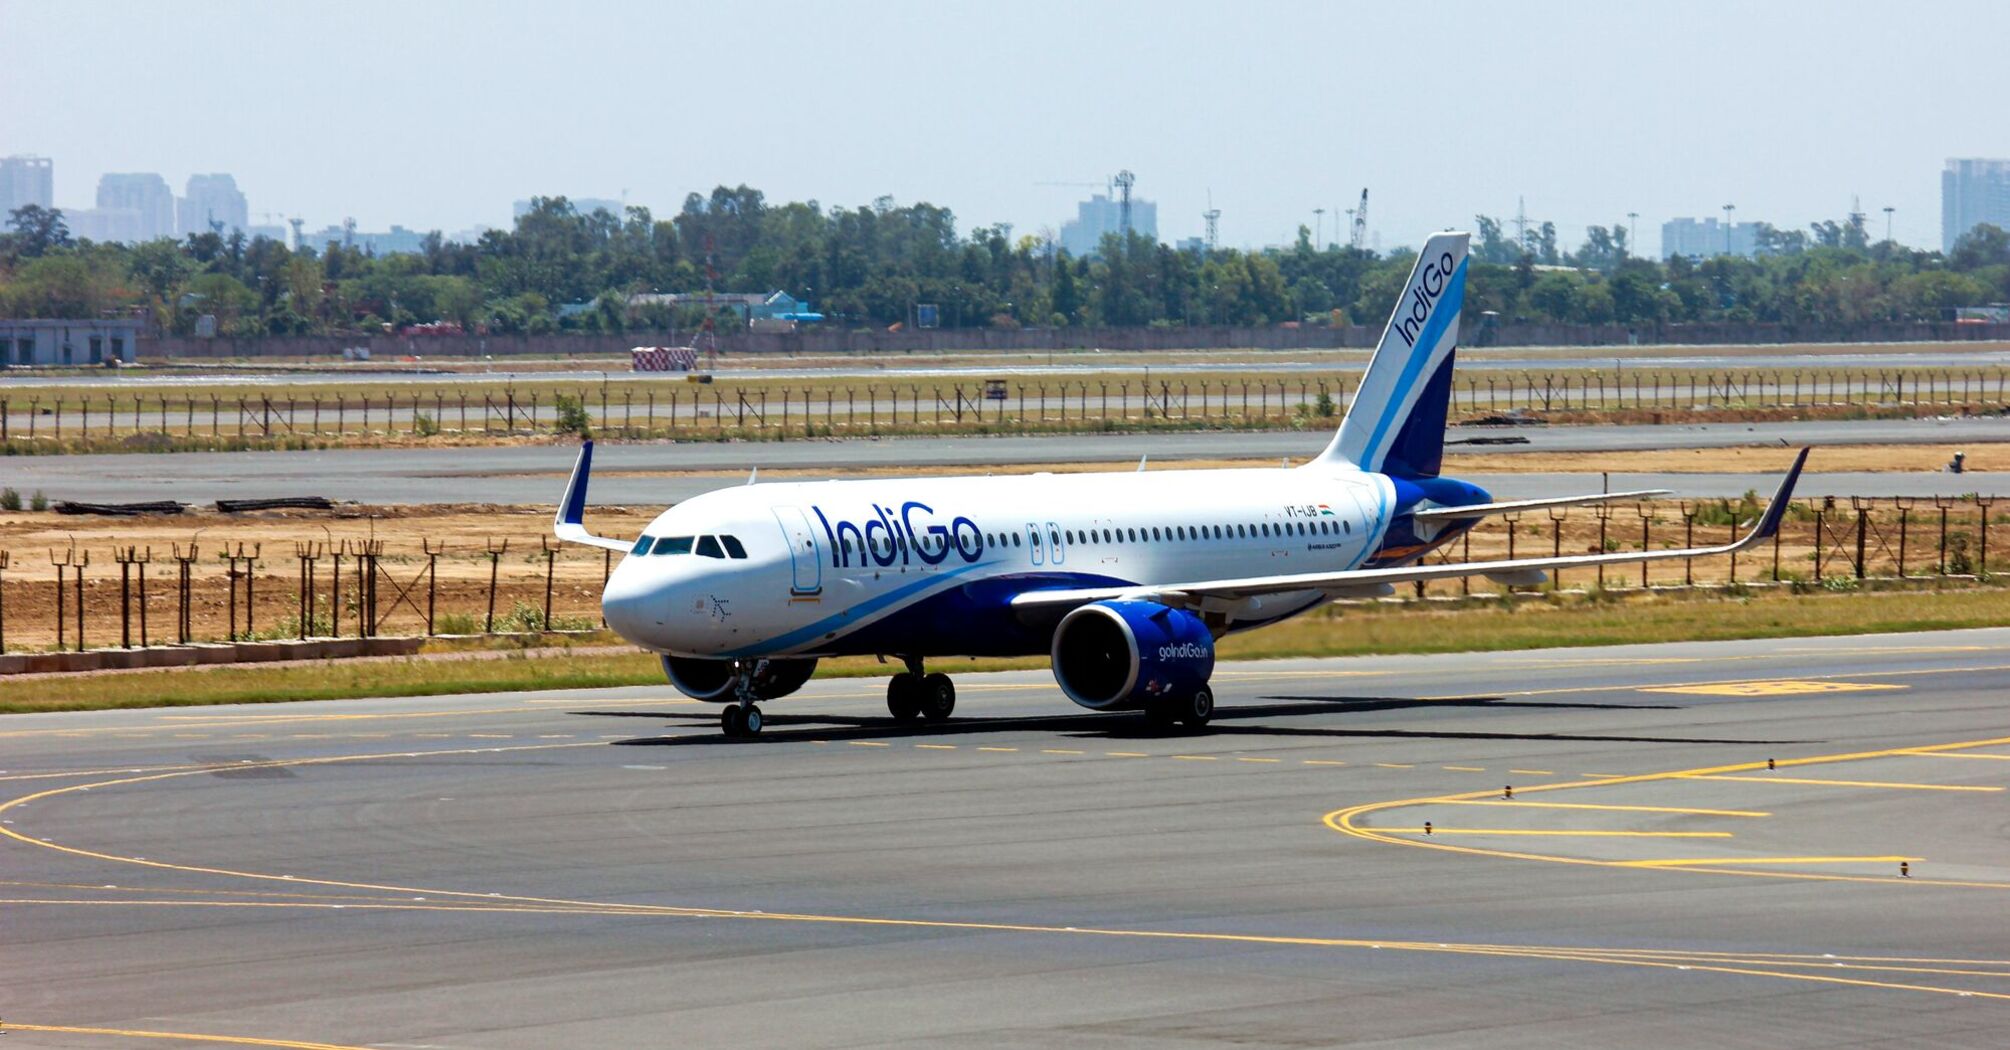 During the IndiGo flight, a bomb threat message was found: the threat was discovered in the restroom